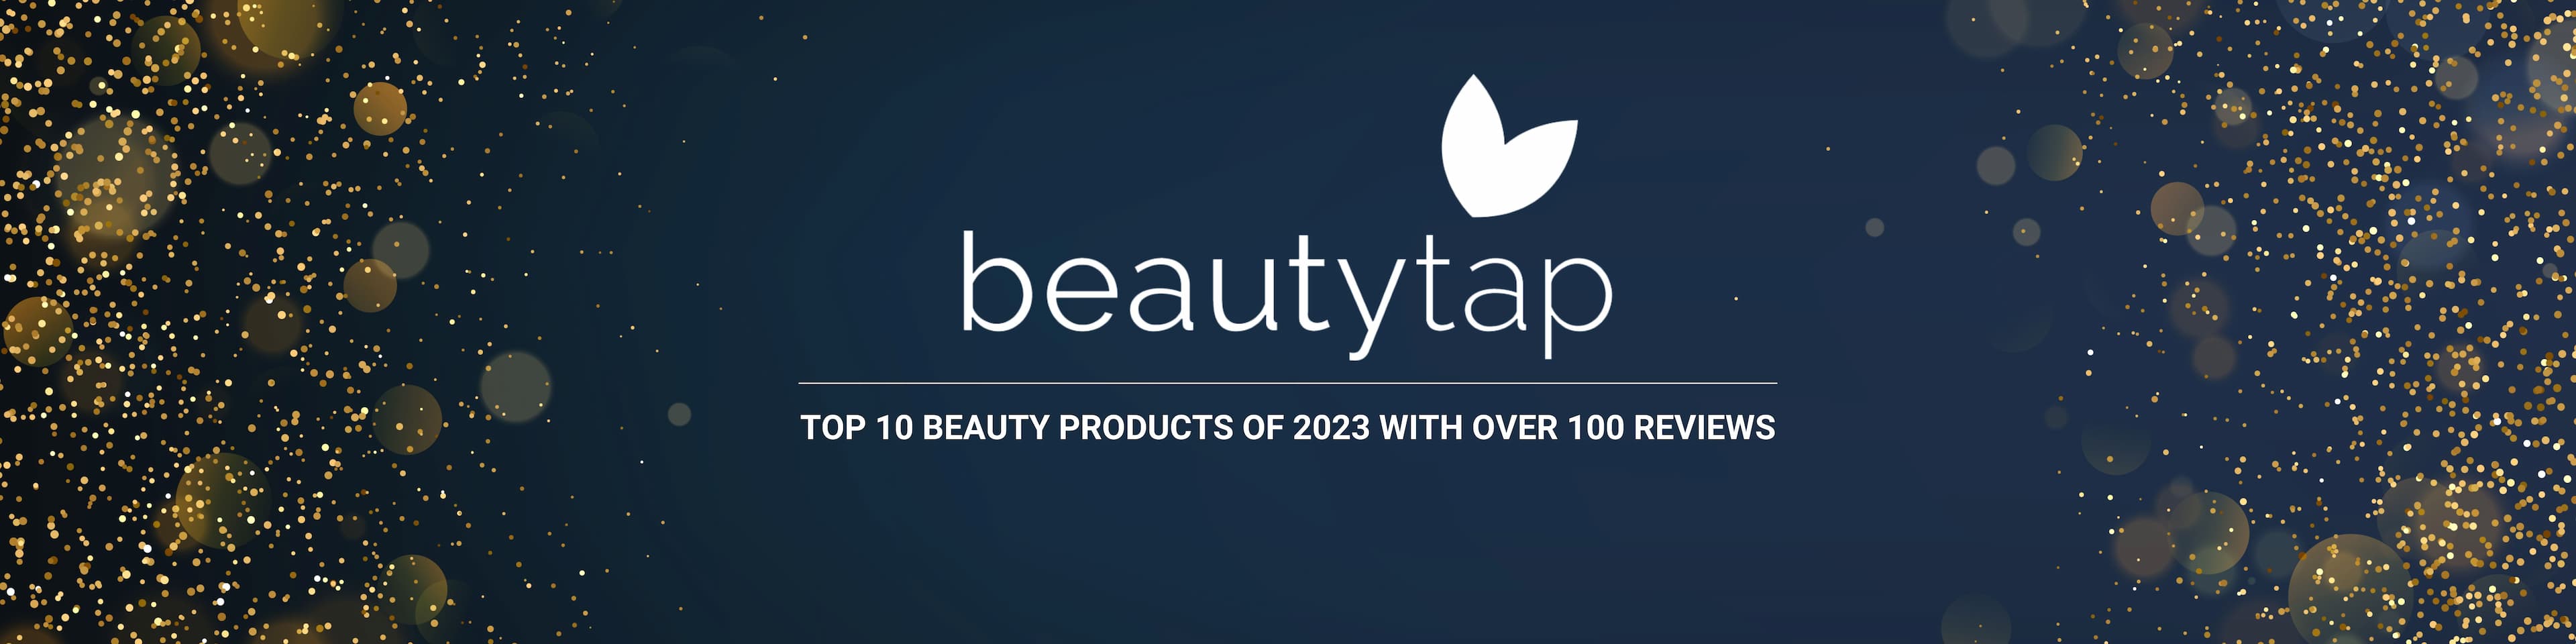 Beautytap Awards - Top 10 Beauty Products of 2023 with Over 100 Reviews